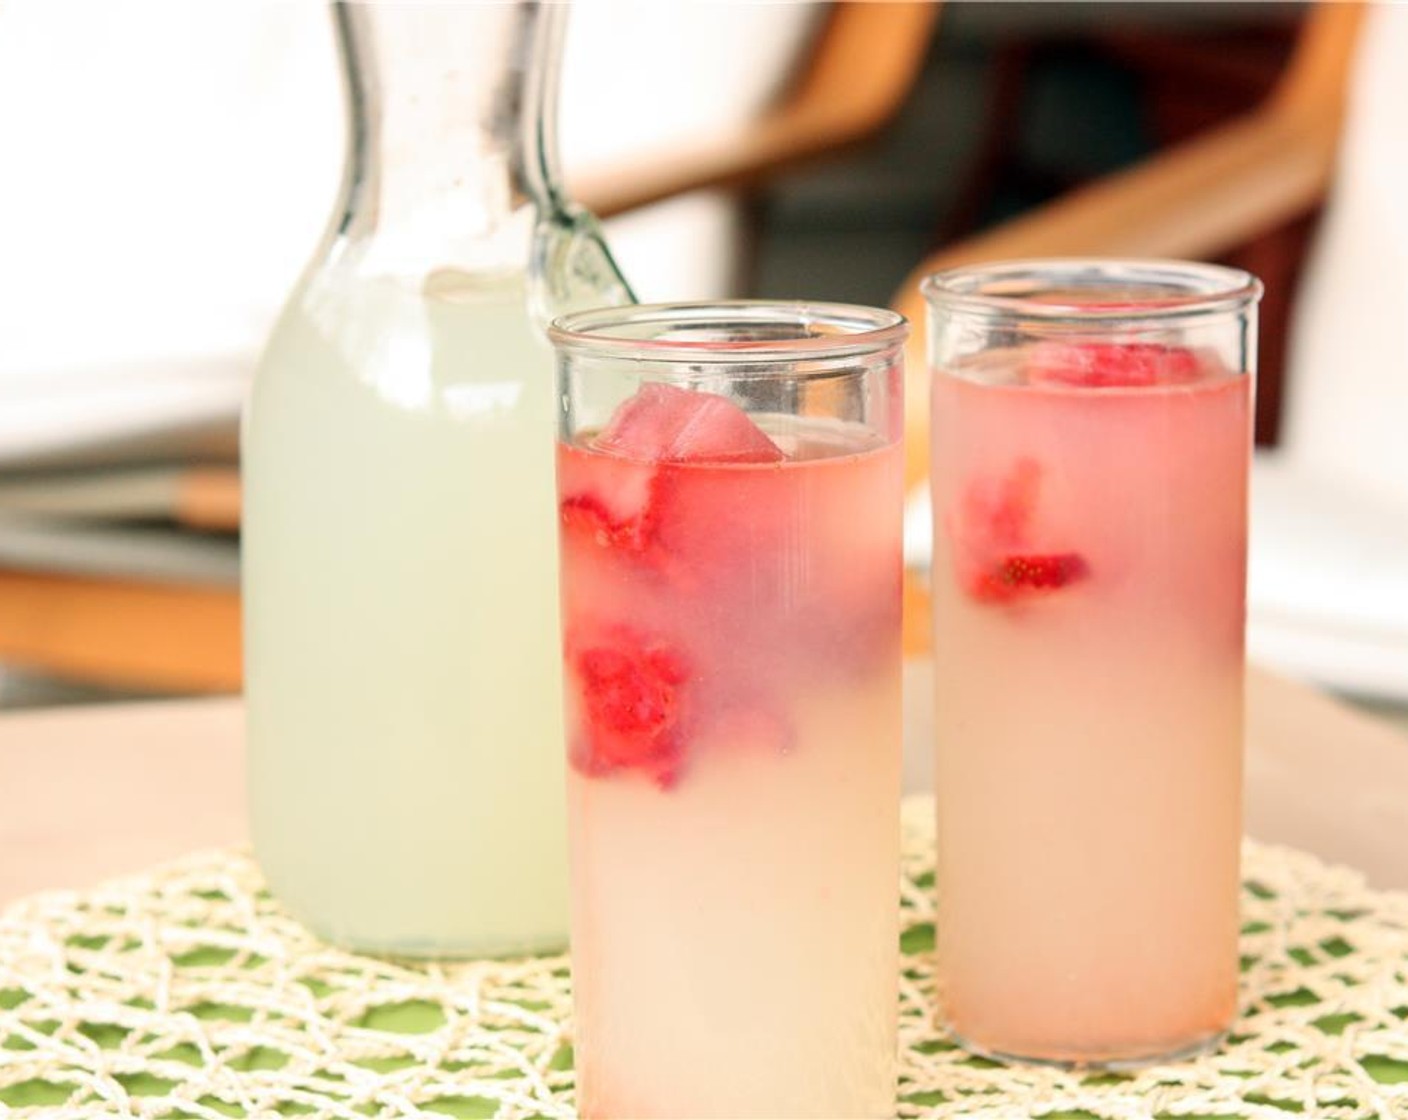 step 4 Use cubes to chill lemonade, sparkling water, or any other strawberries-worthy cold beverage.